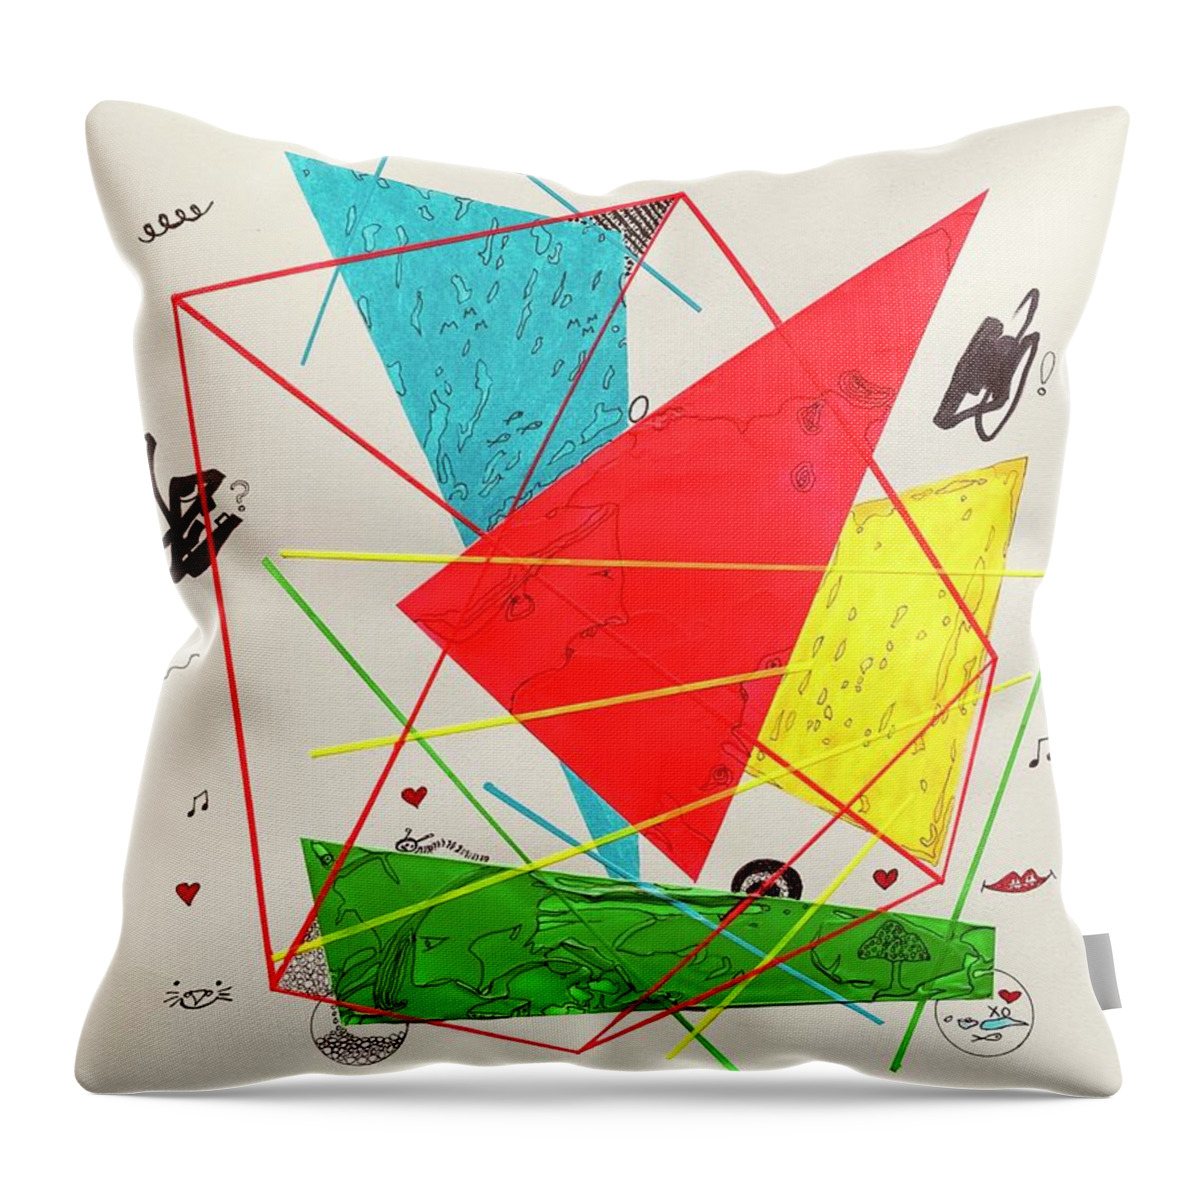  Throw Pillow featuring the mixed media Colorful Rays 16202 by Lew Hagood